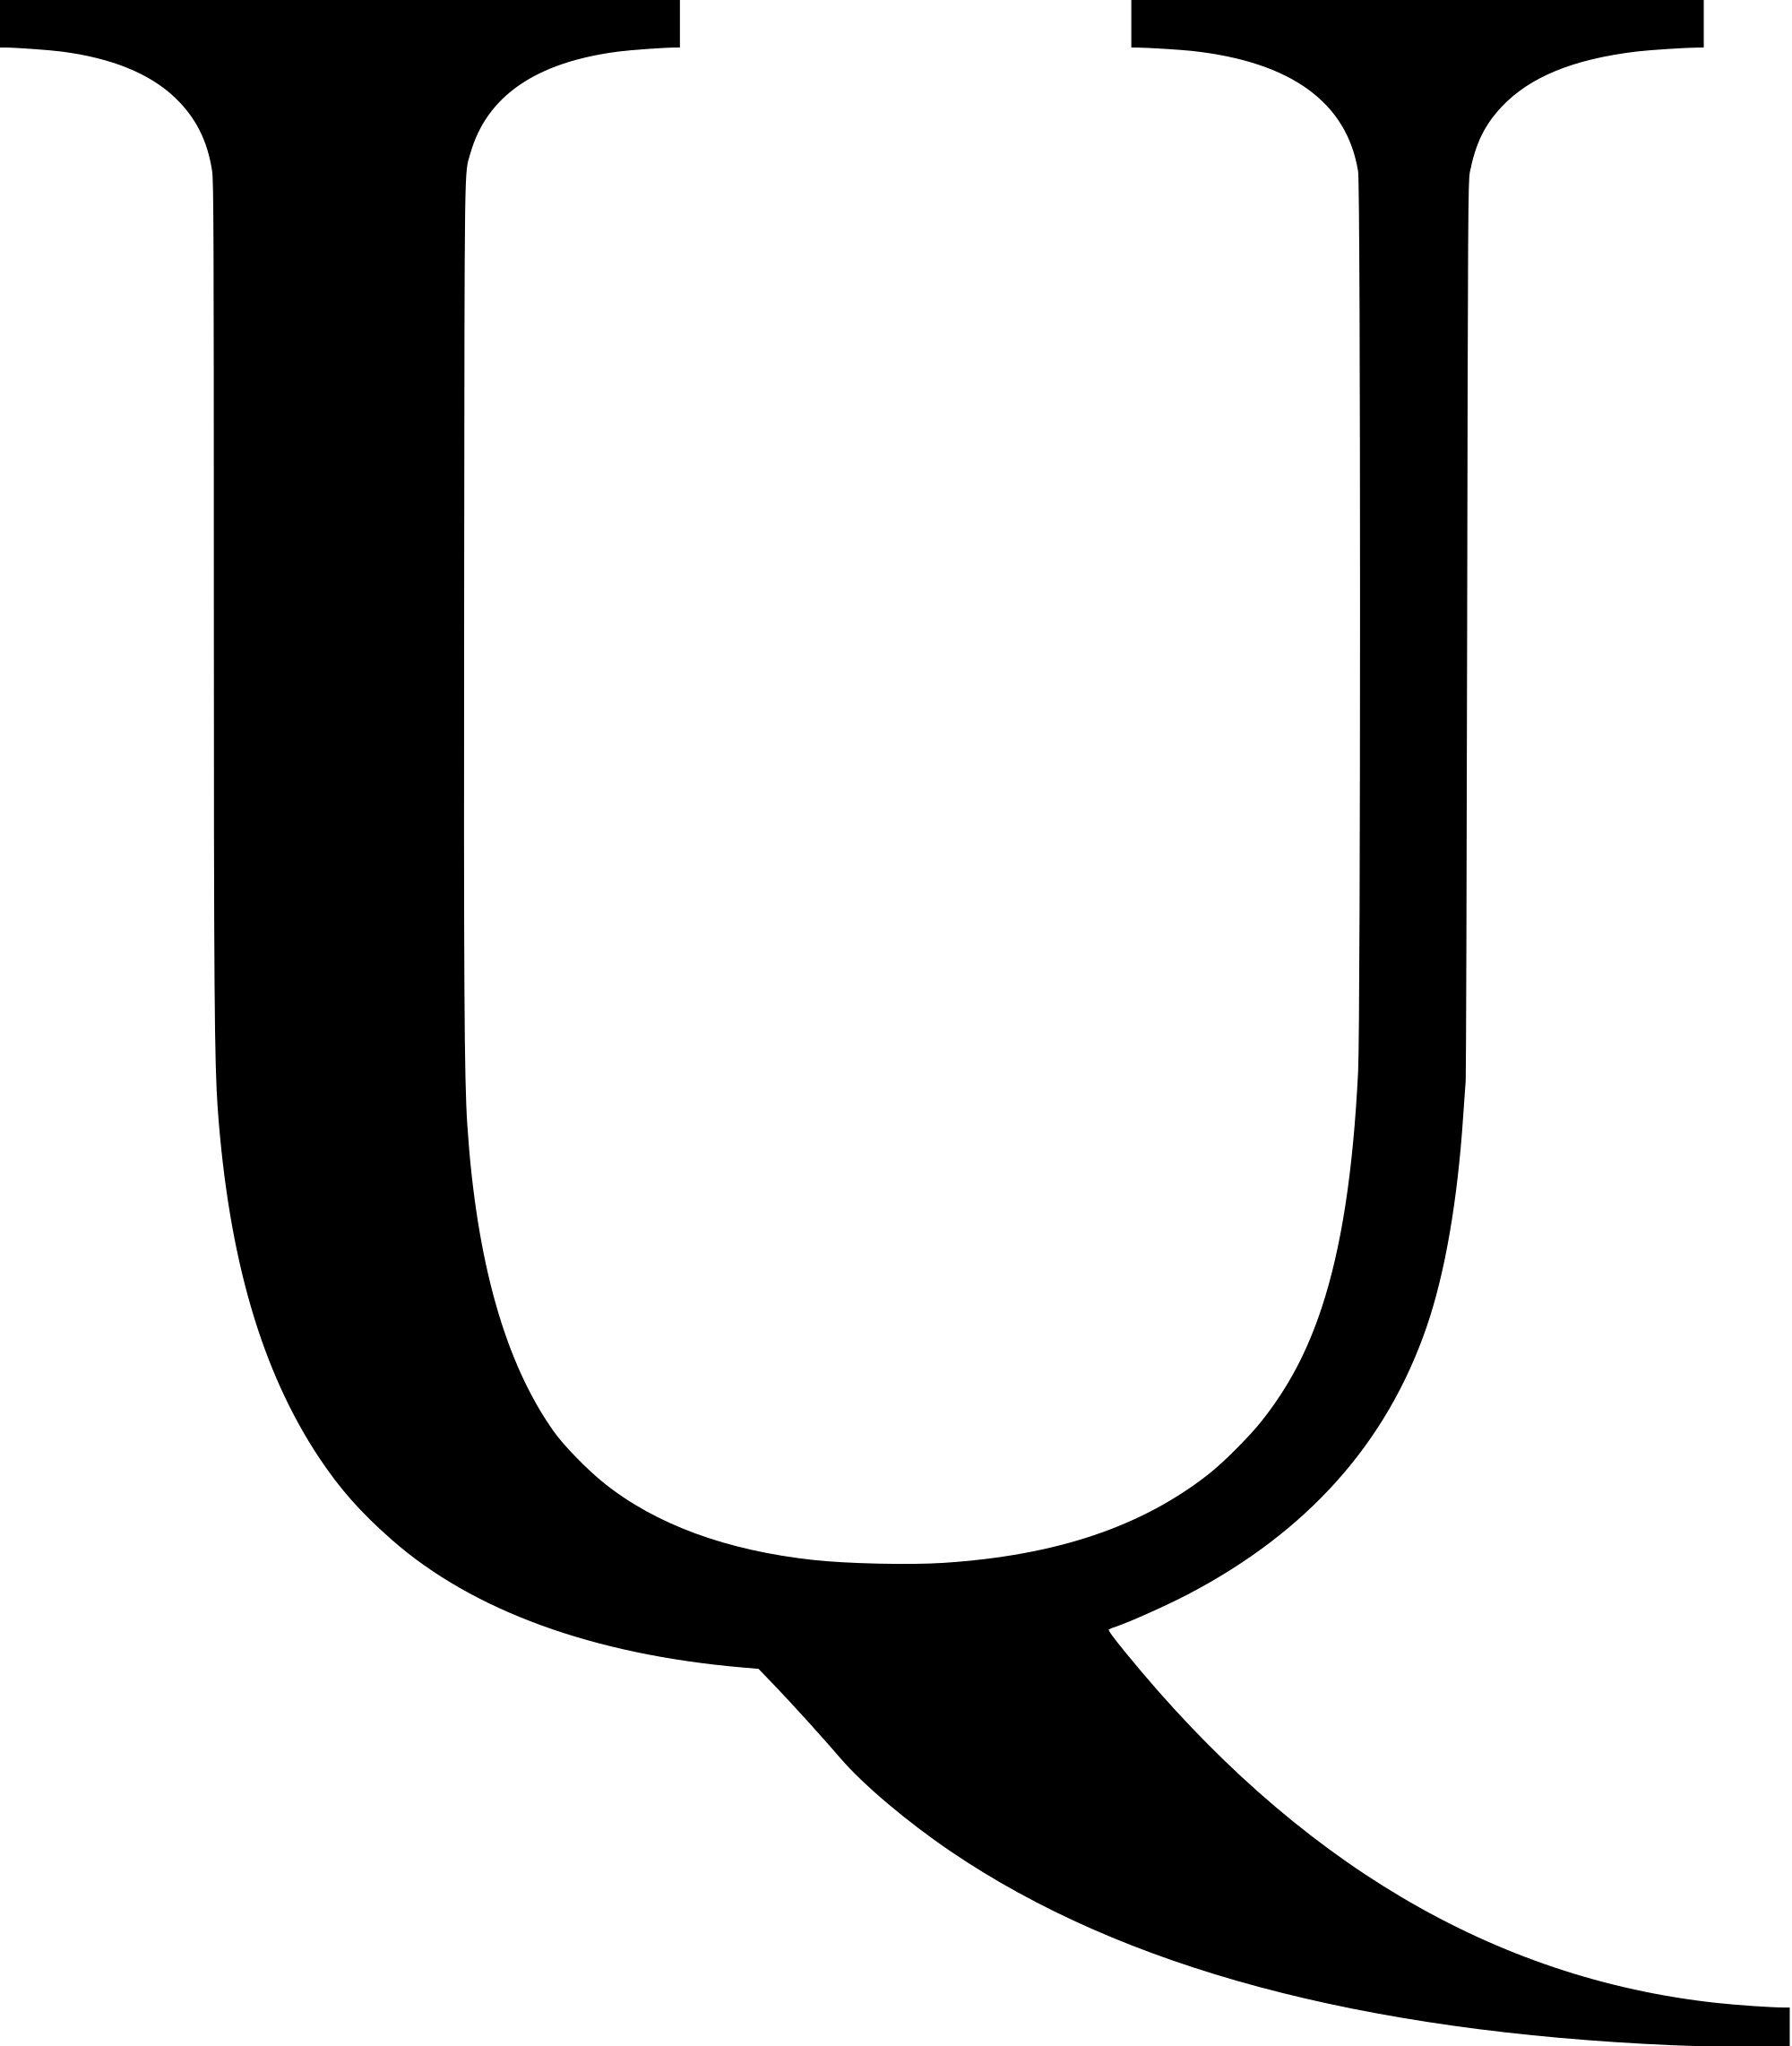 Q and U Letter Logo - File:Latin capital letter U with Q-tail.svg - Wikimedia Commons